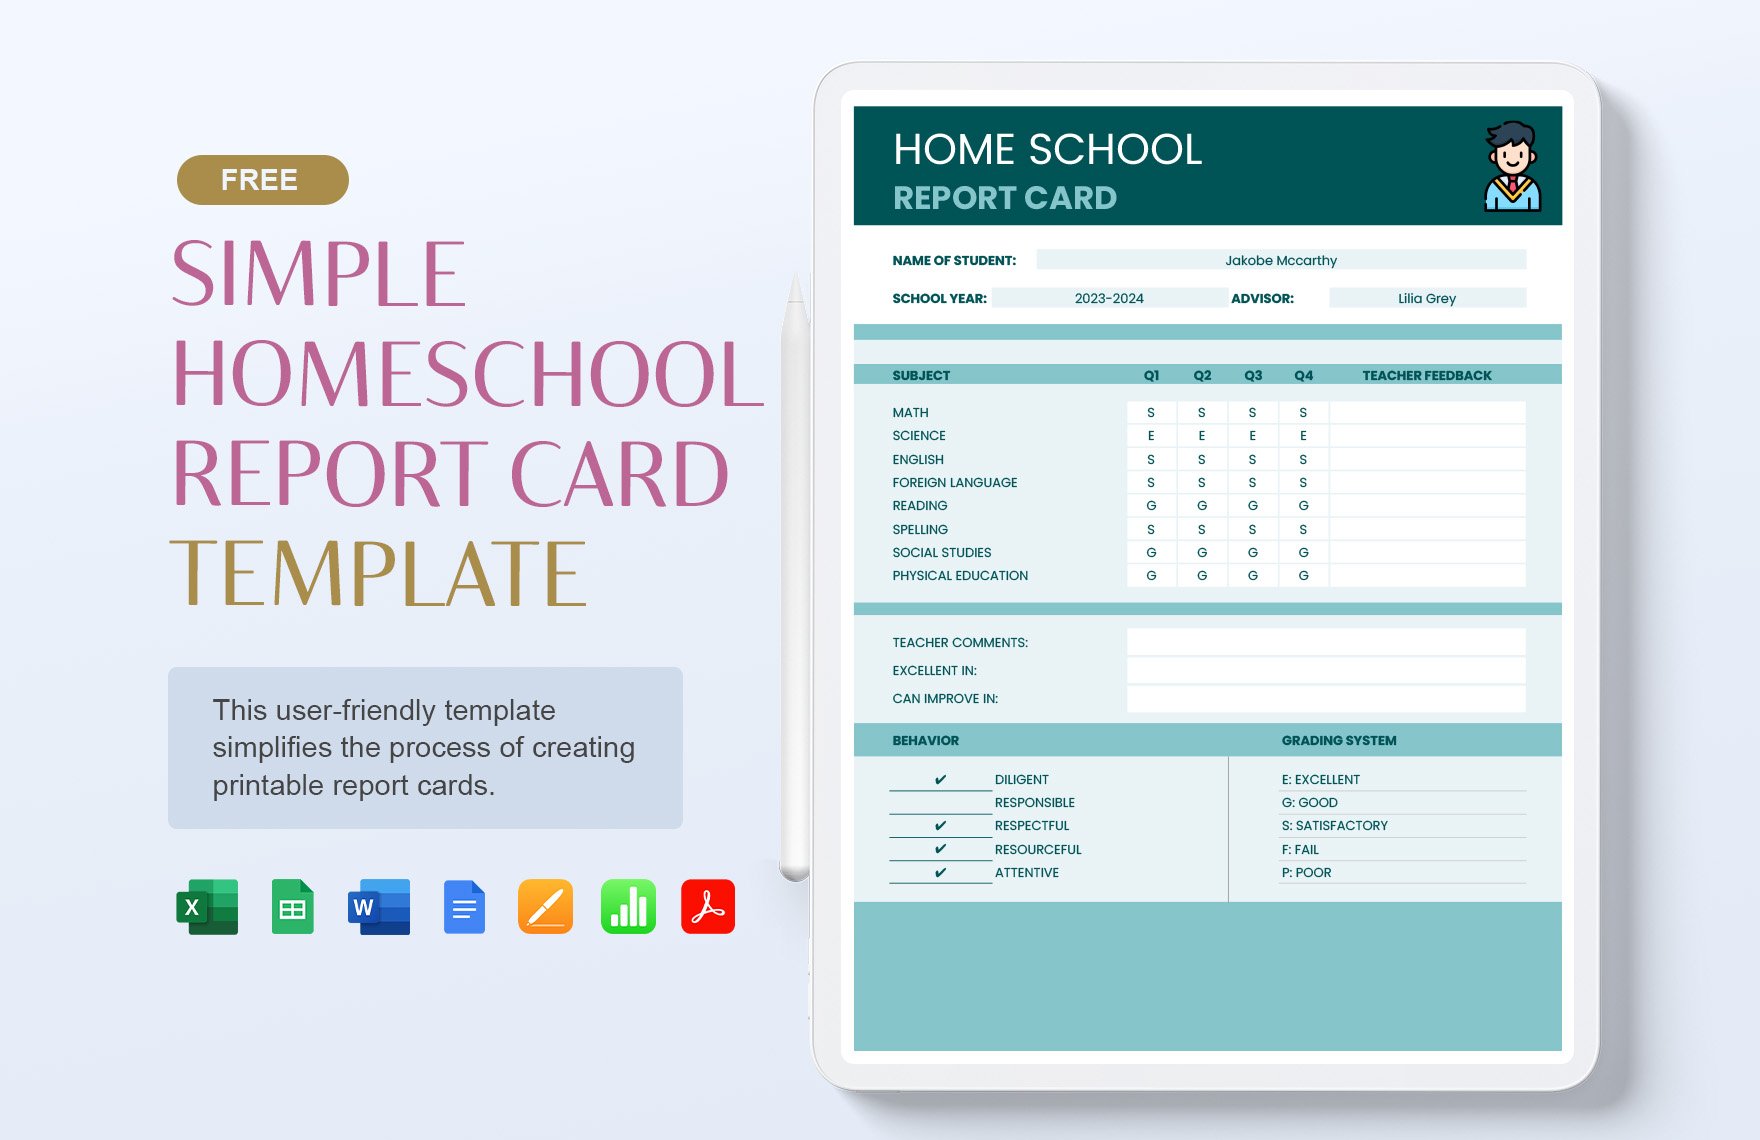 Simple Home School Report Card Template